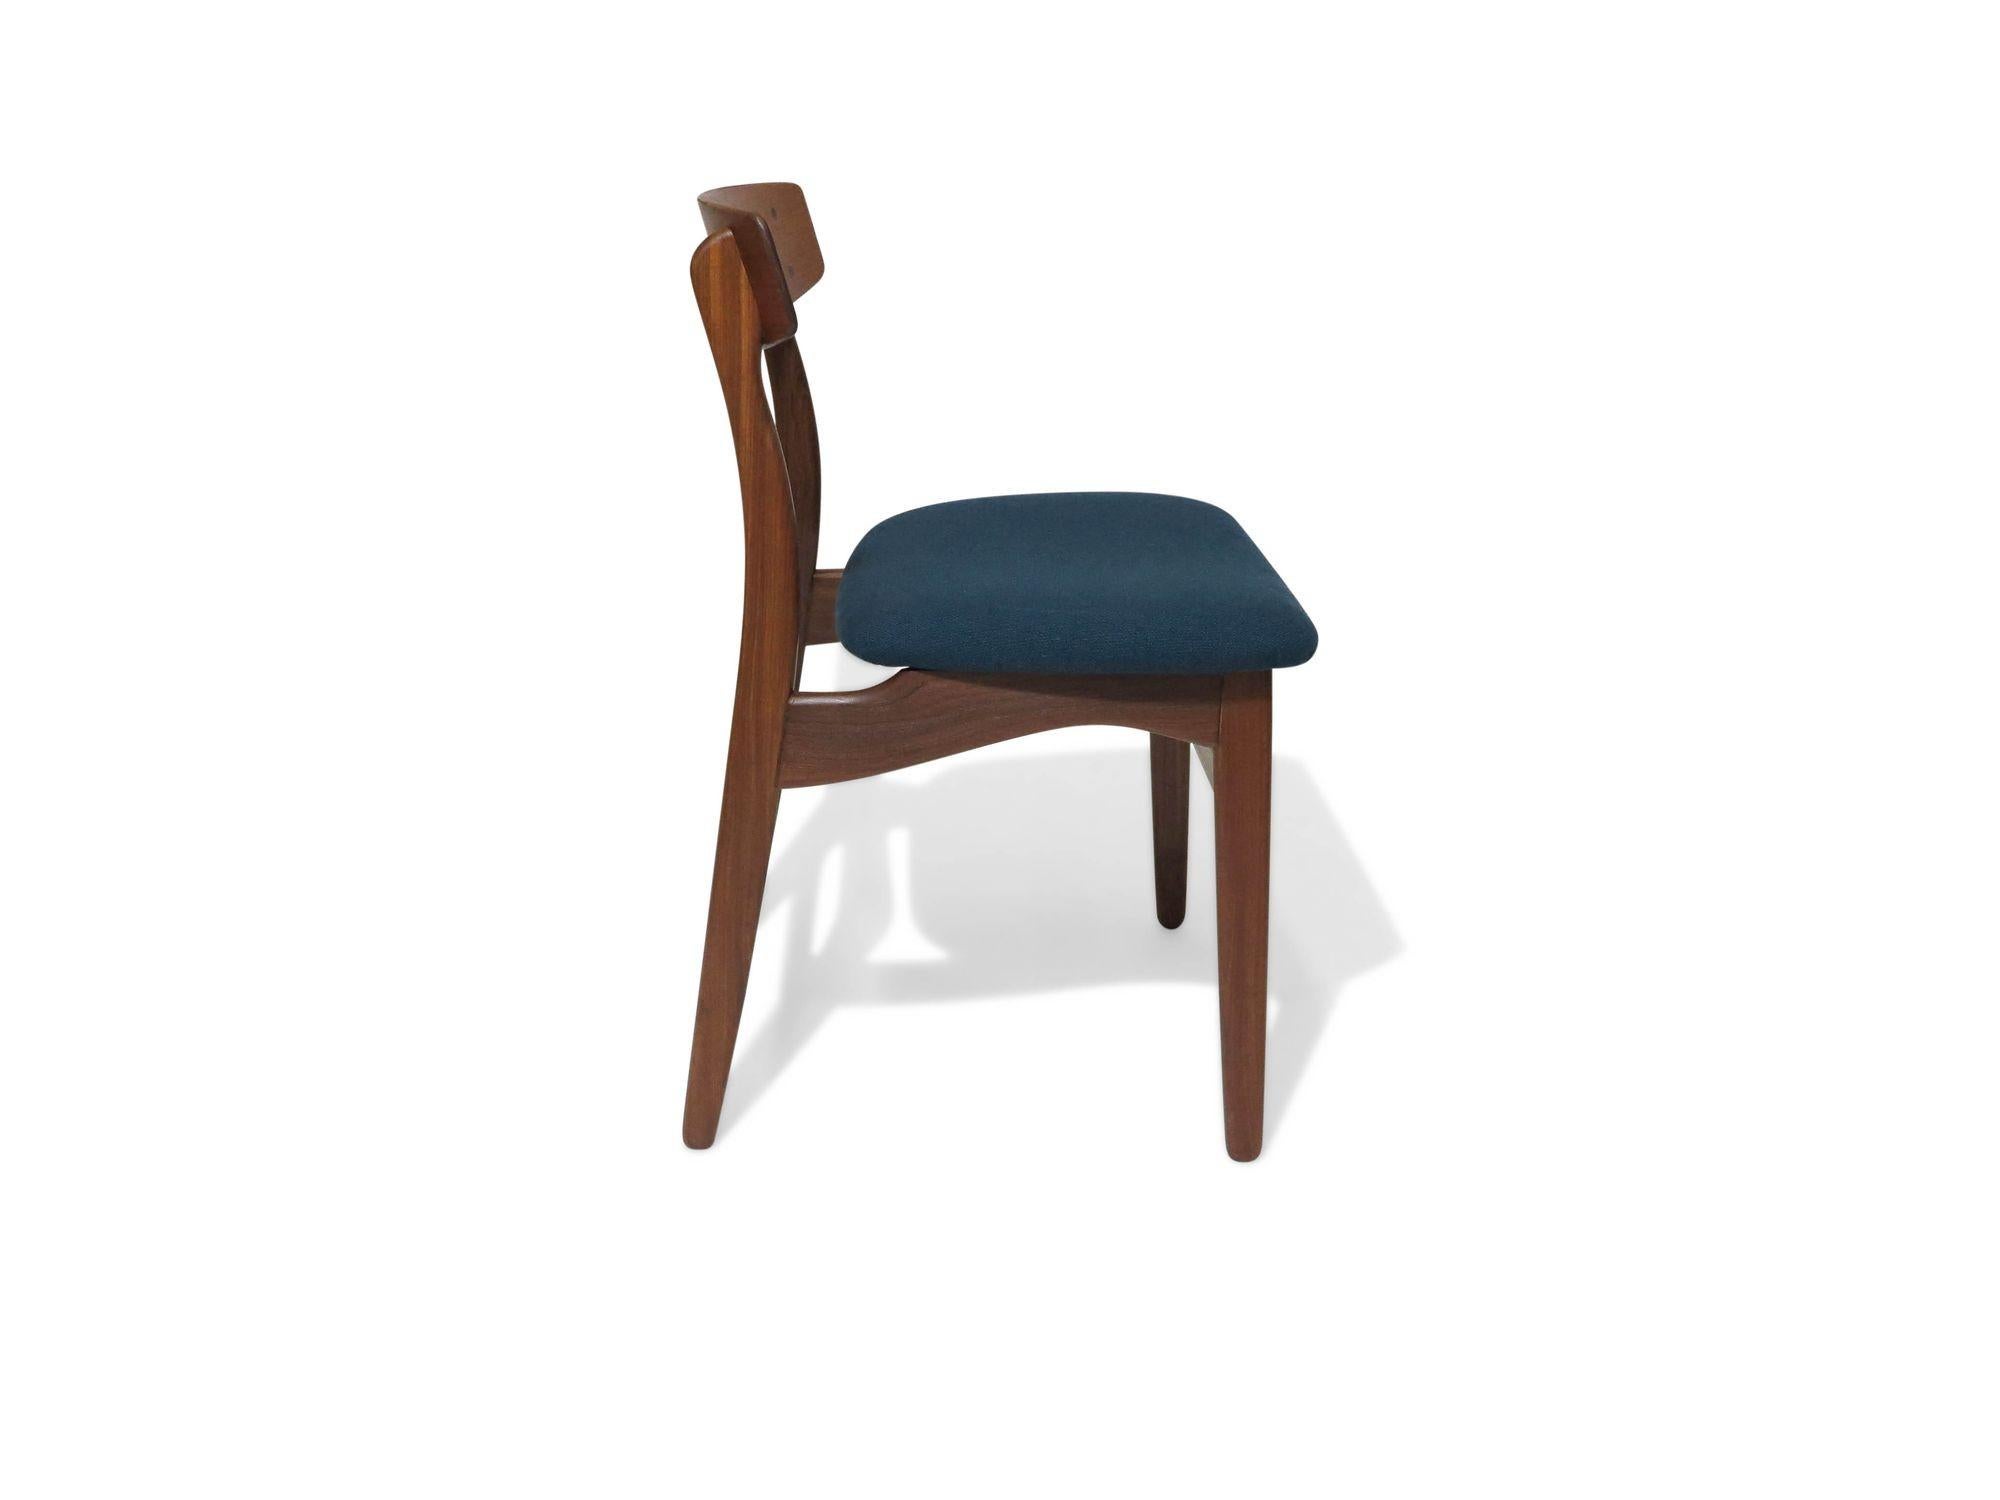 Six Danish Teak Dining Chairs In Excellent Condition For Sale In Oakland, CA